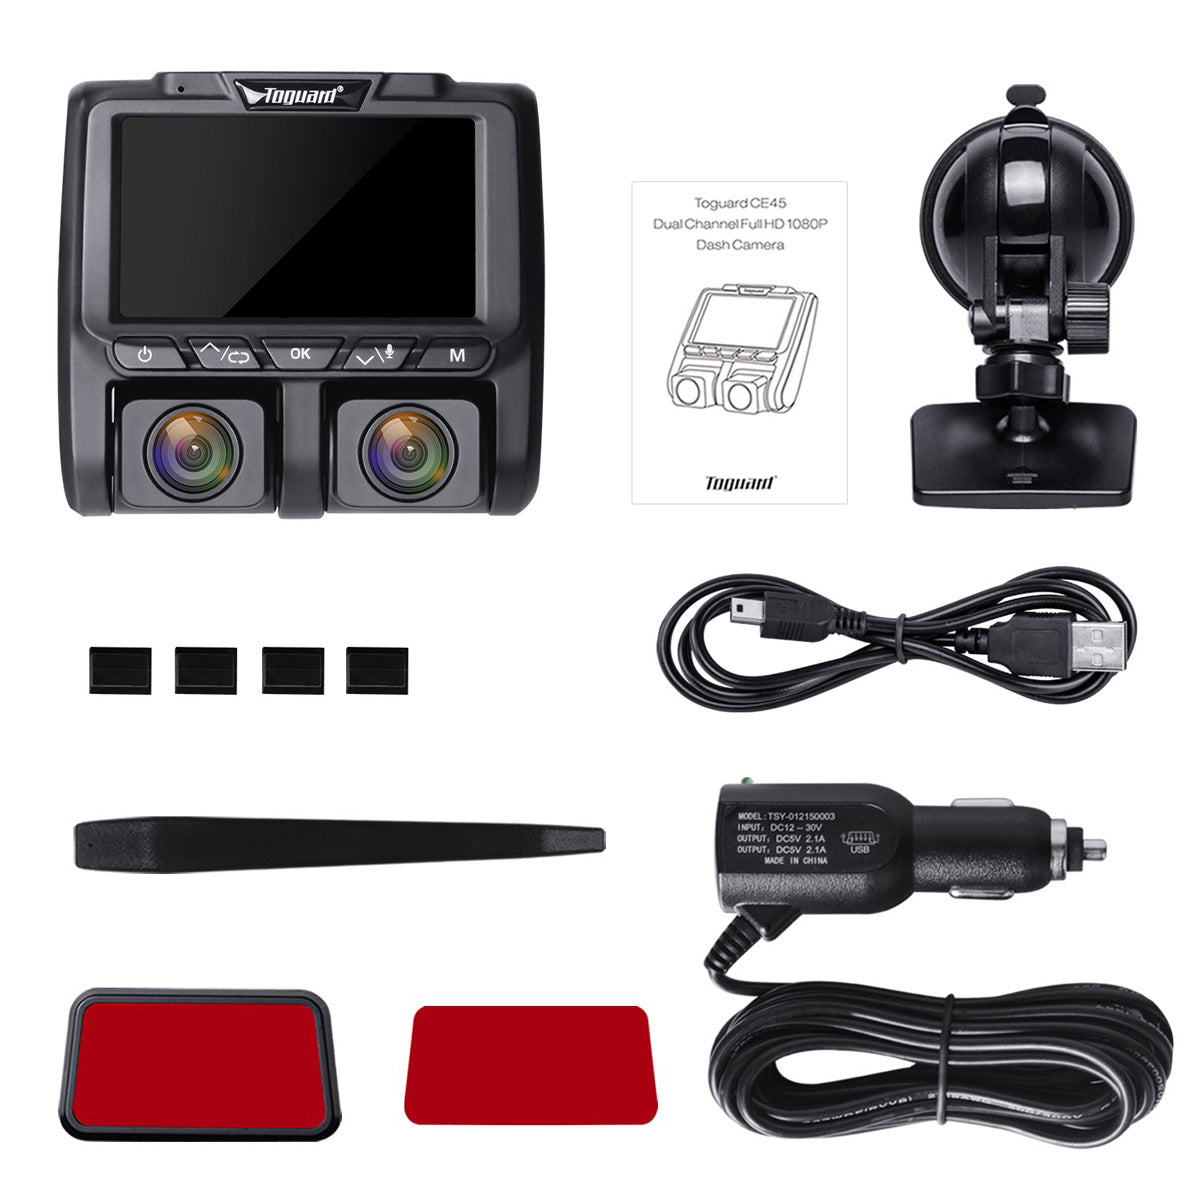 Dual Dash Cam with IR Night Vision, Toguard Dual Lens 1080p Front and Cabin